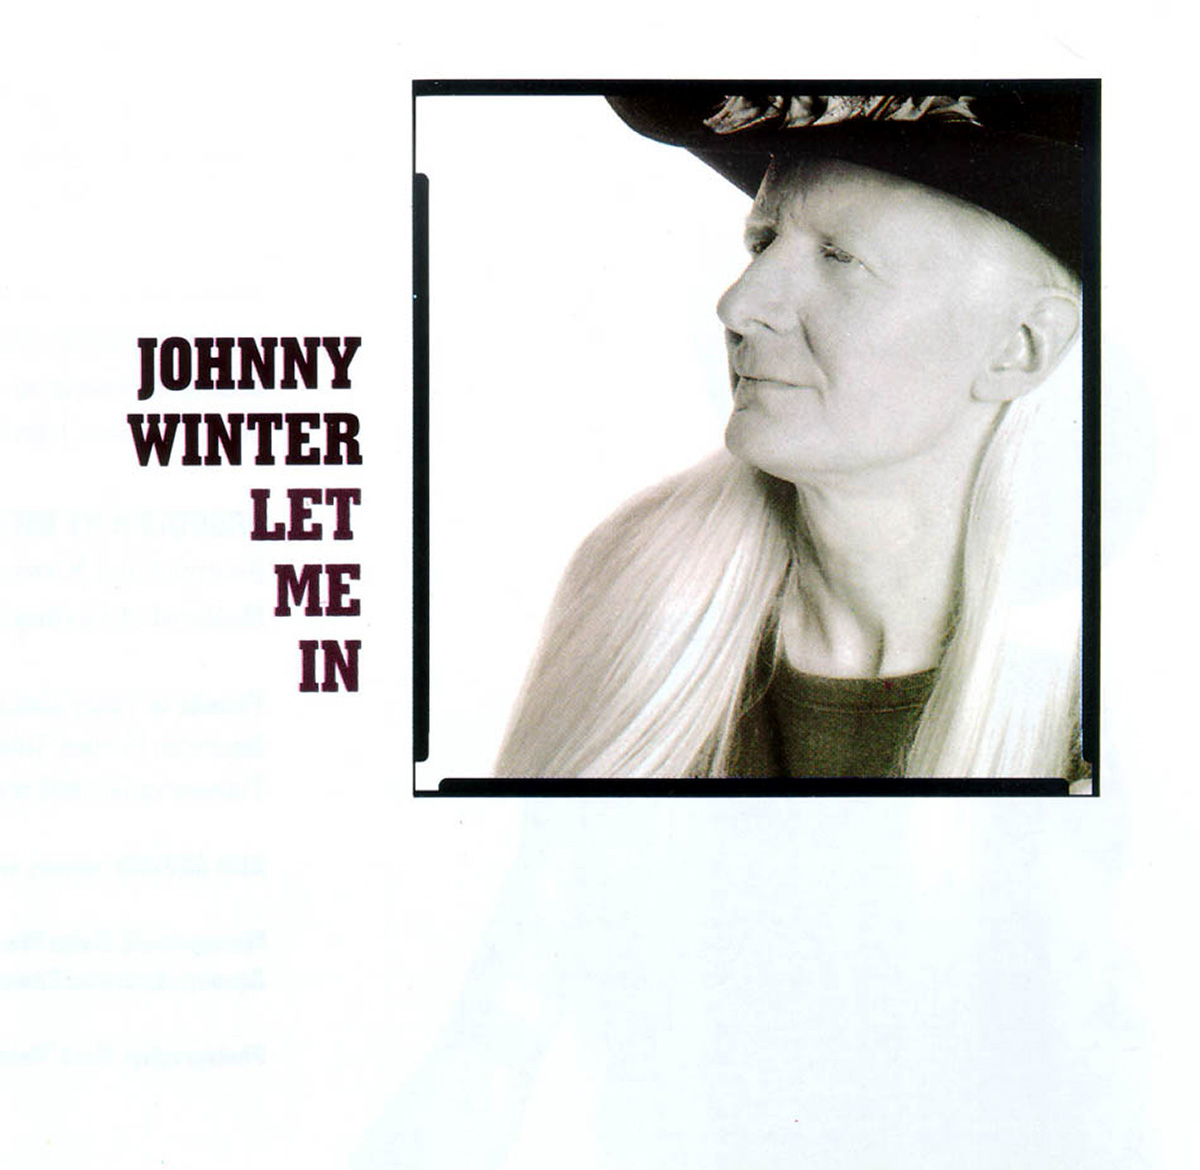 JOHNNY WINTER - Let Me In front cover photo https://vinyl-records.nl